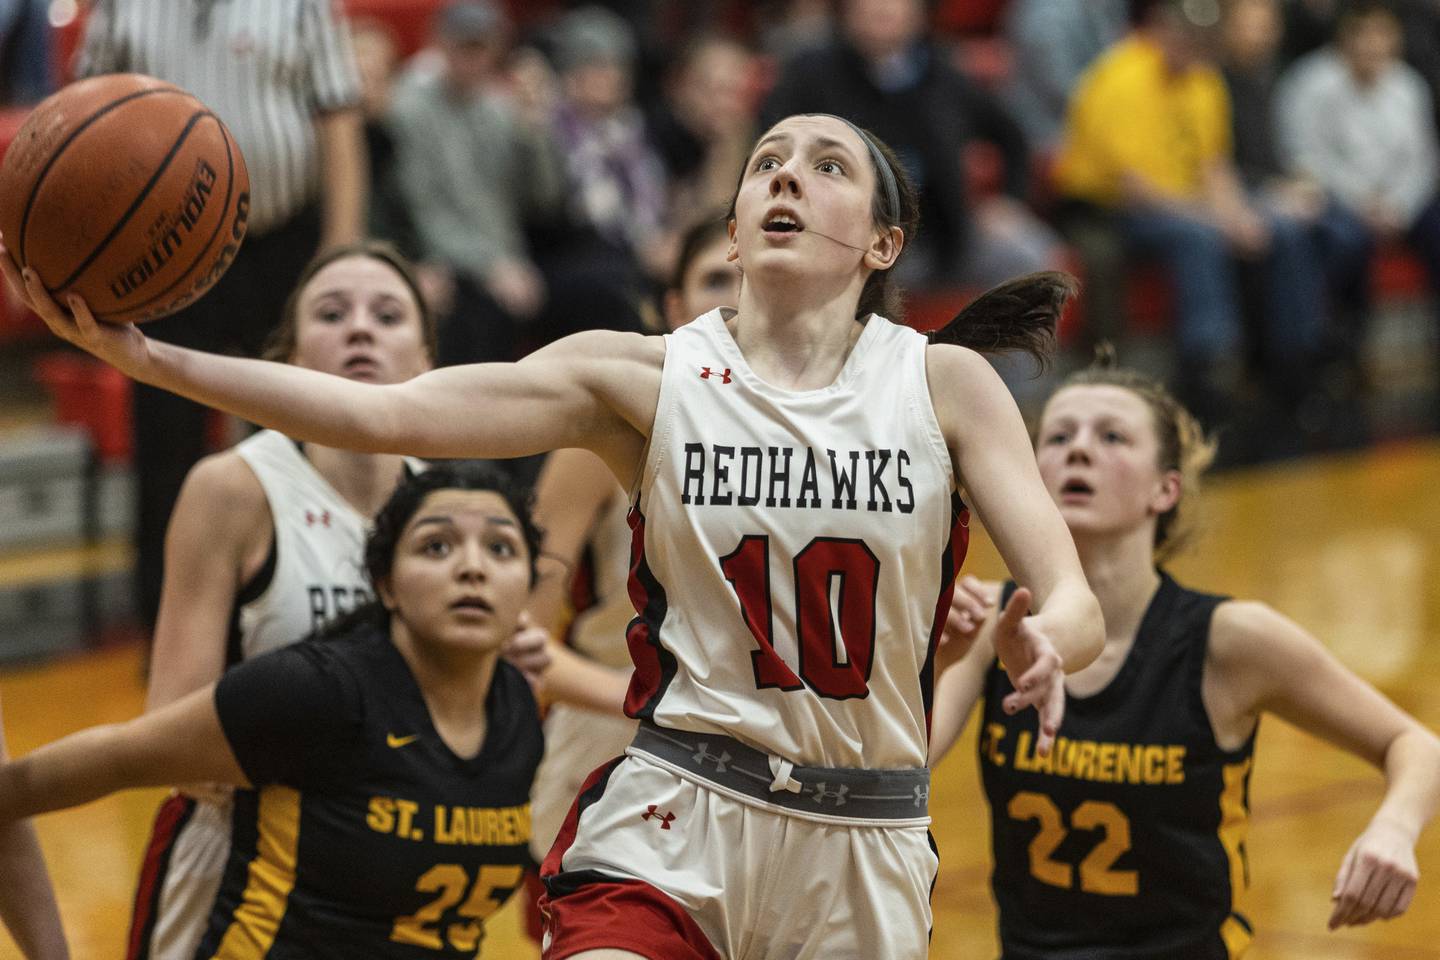 Marist’s Mary Kate Porter (10) goes up for a layup against St. Laurence during a nonconference game in Chicago on Monday, Dec. 19, 2022.